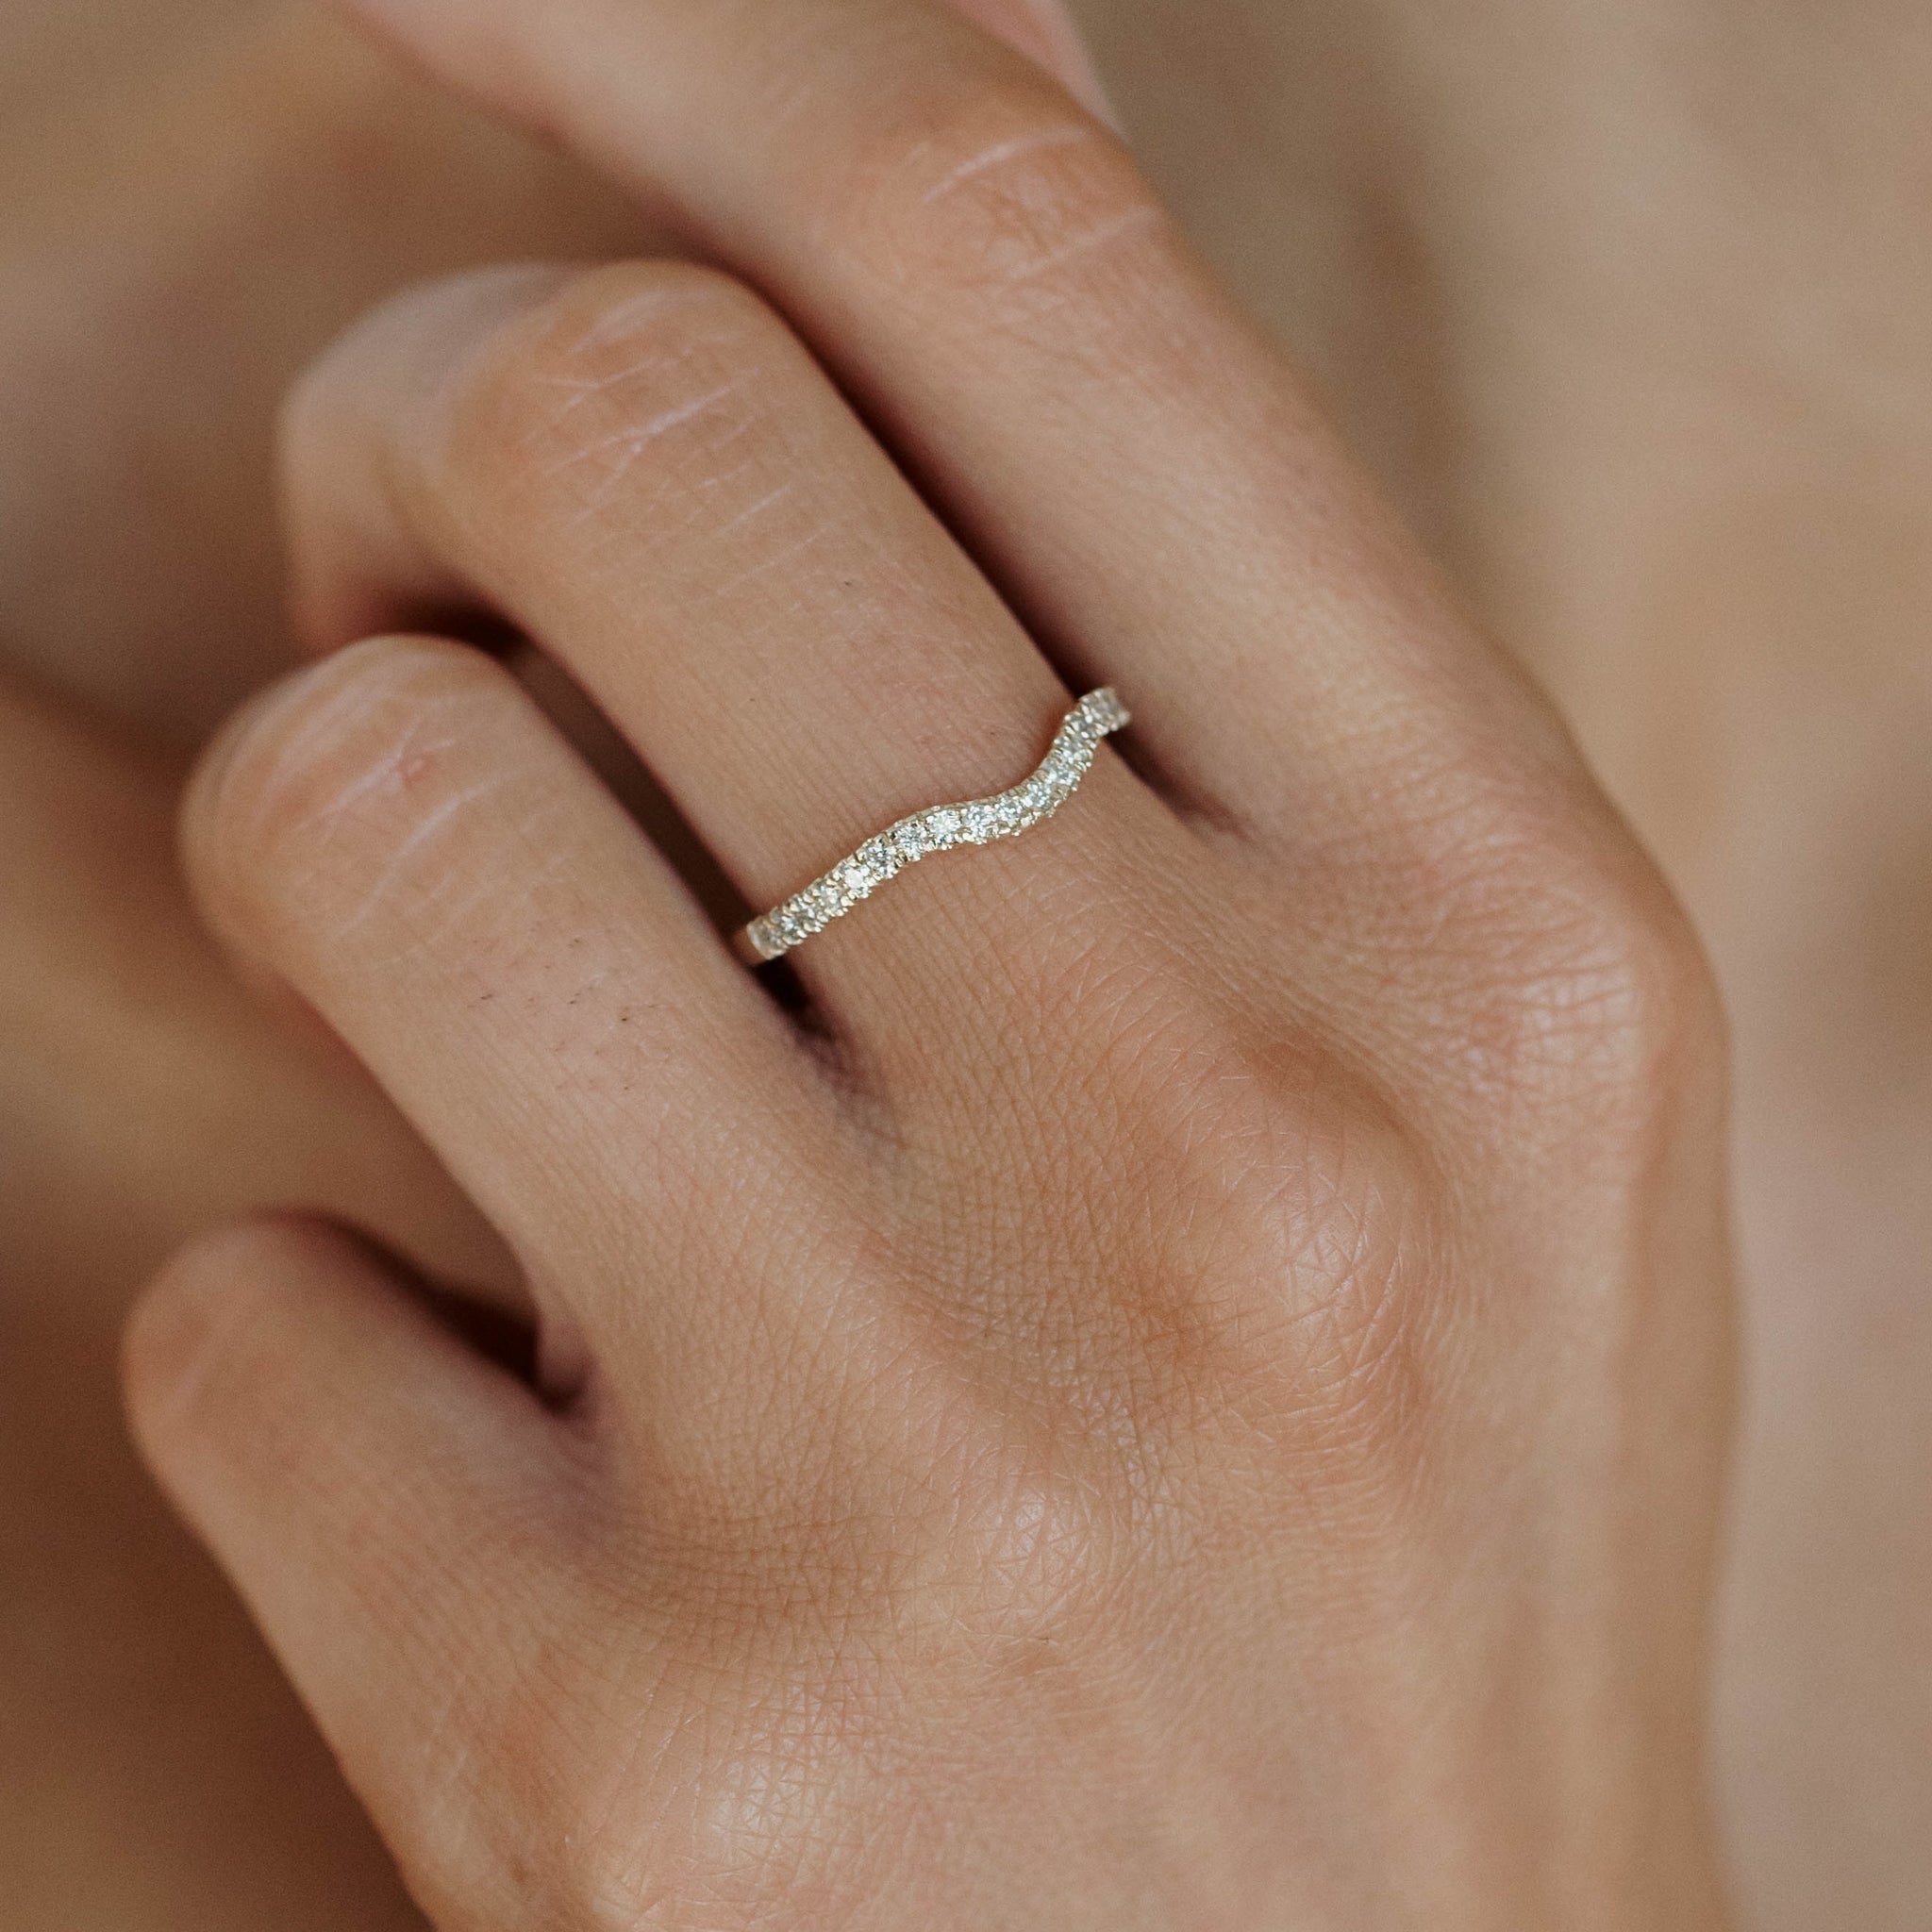 Archive — Pia | Slightly Curved Diamond Ring | Size M